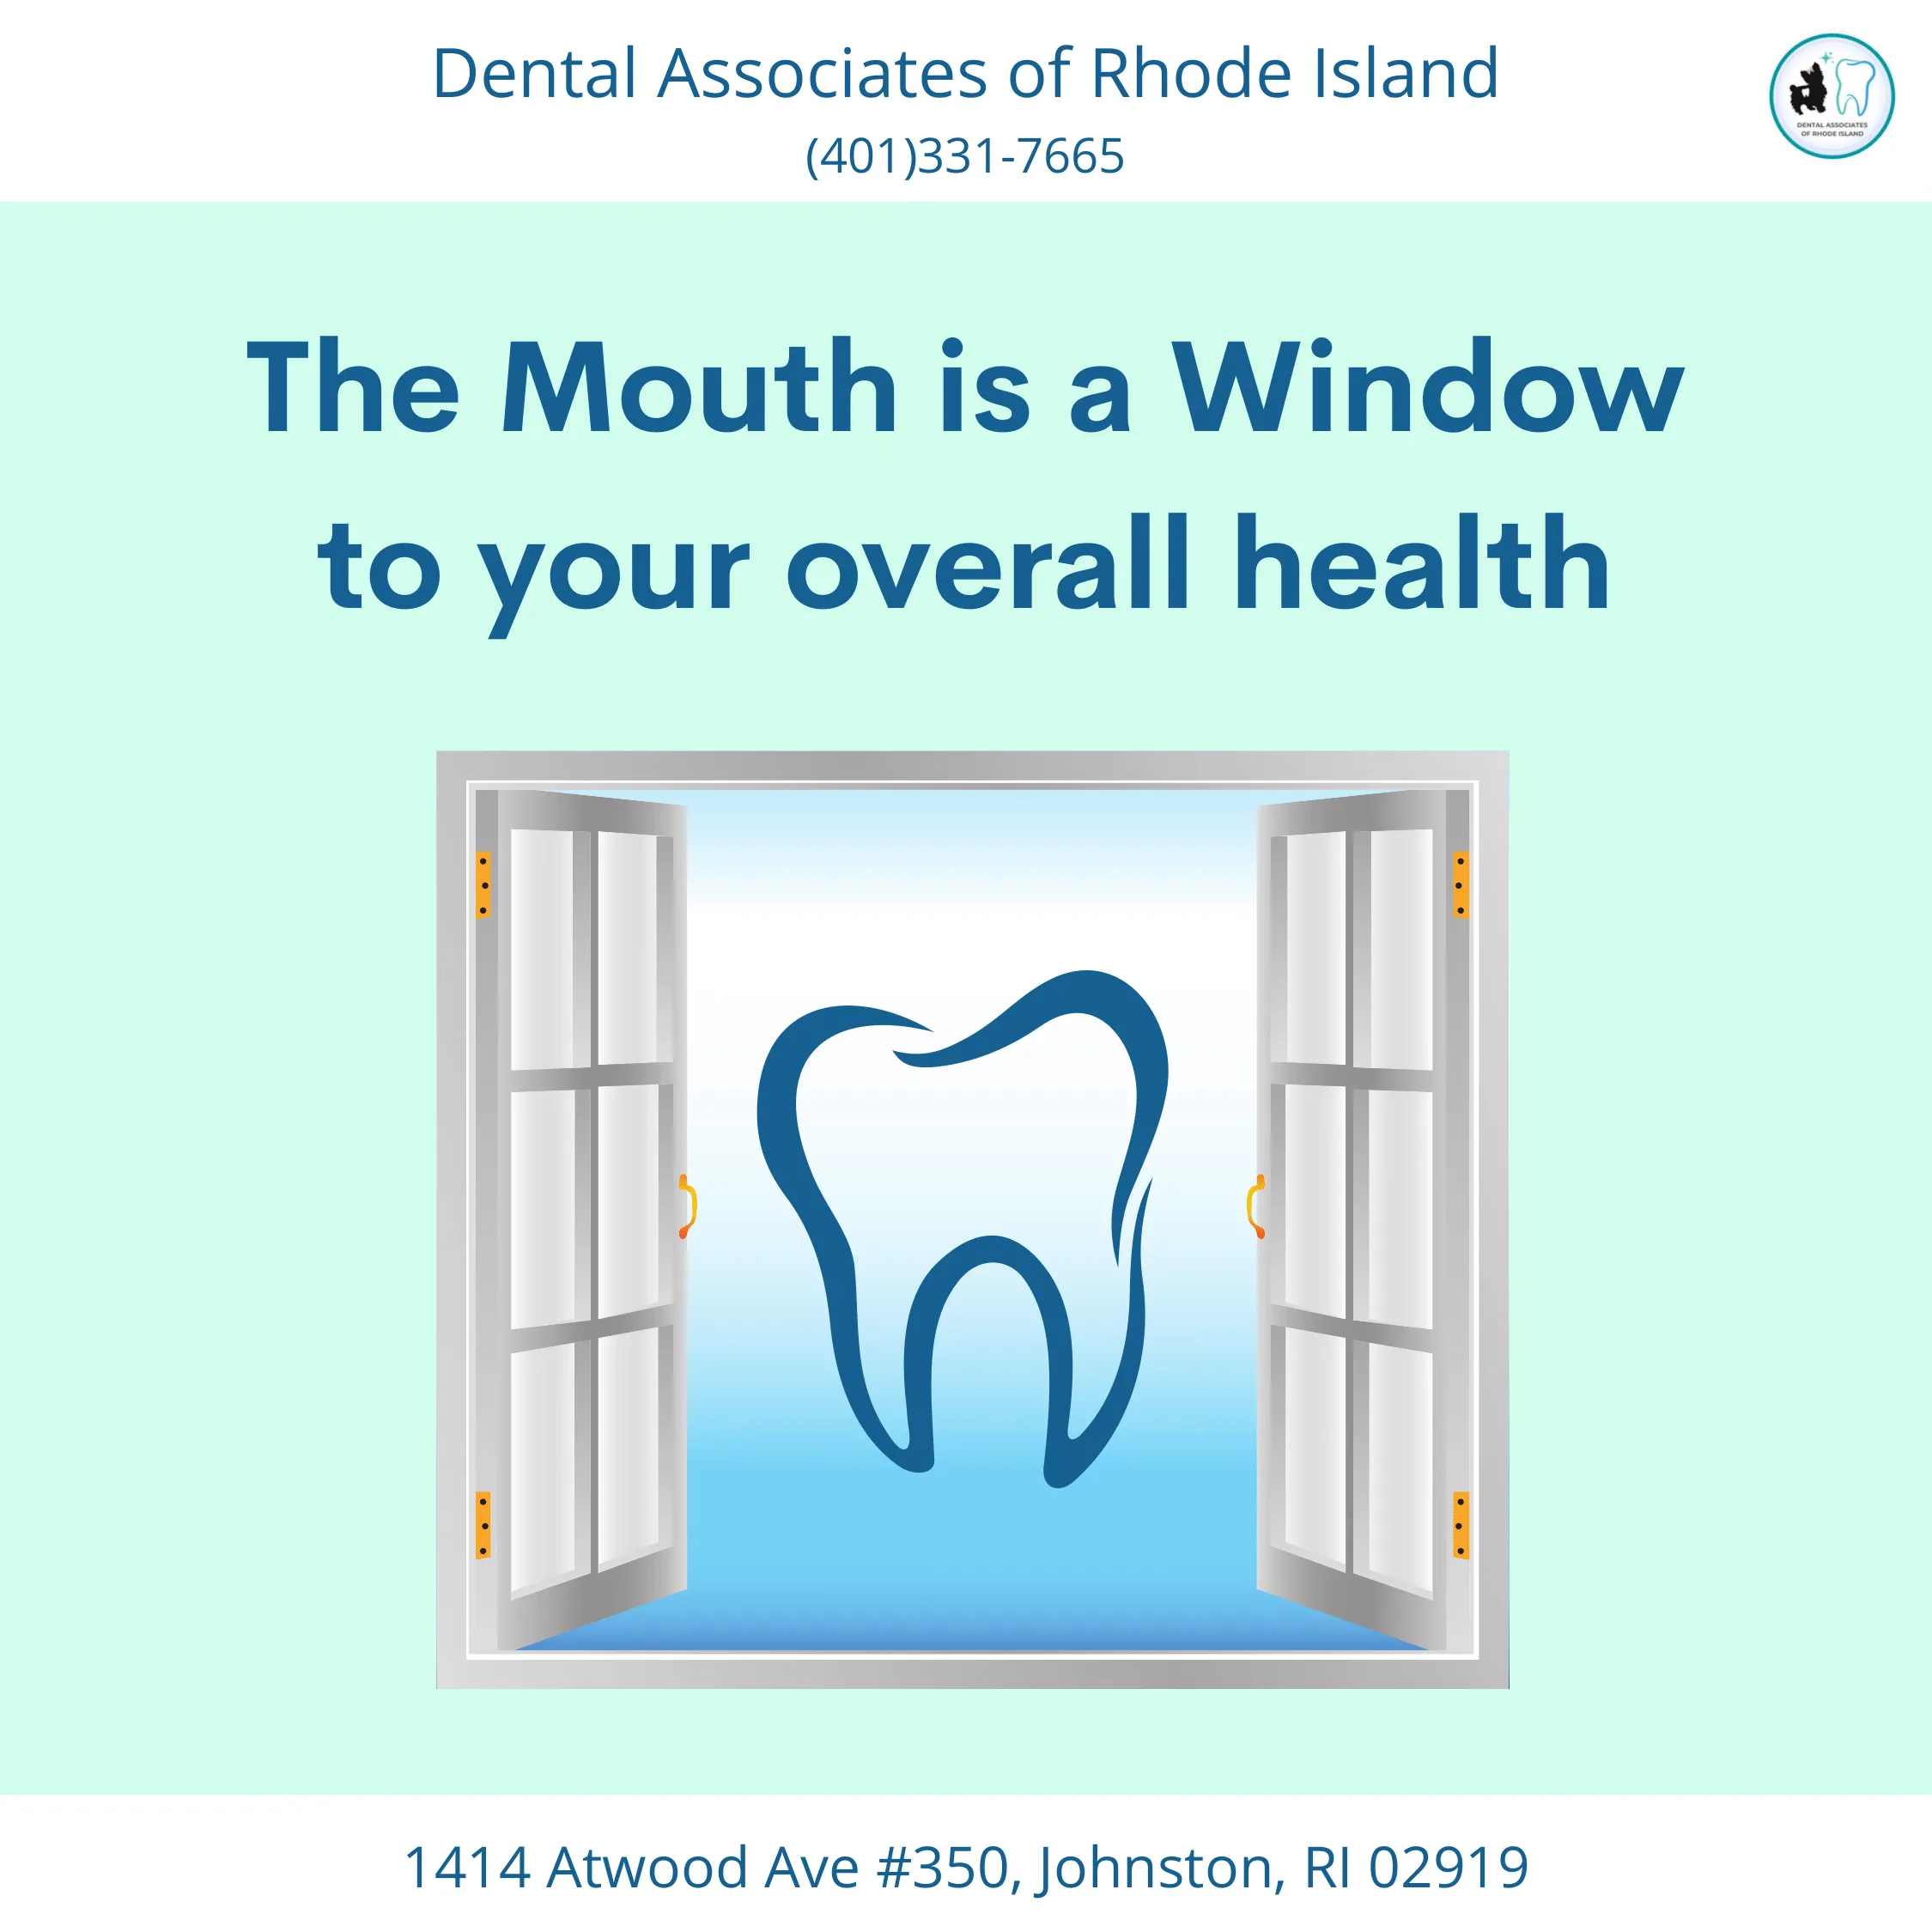 Your mouth is a window to overall health